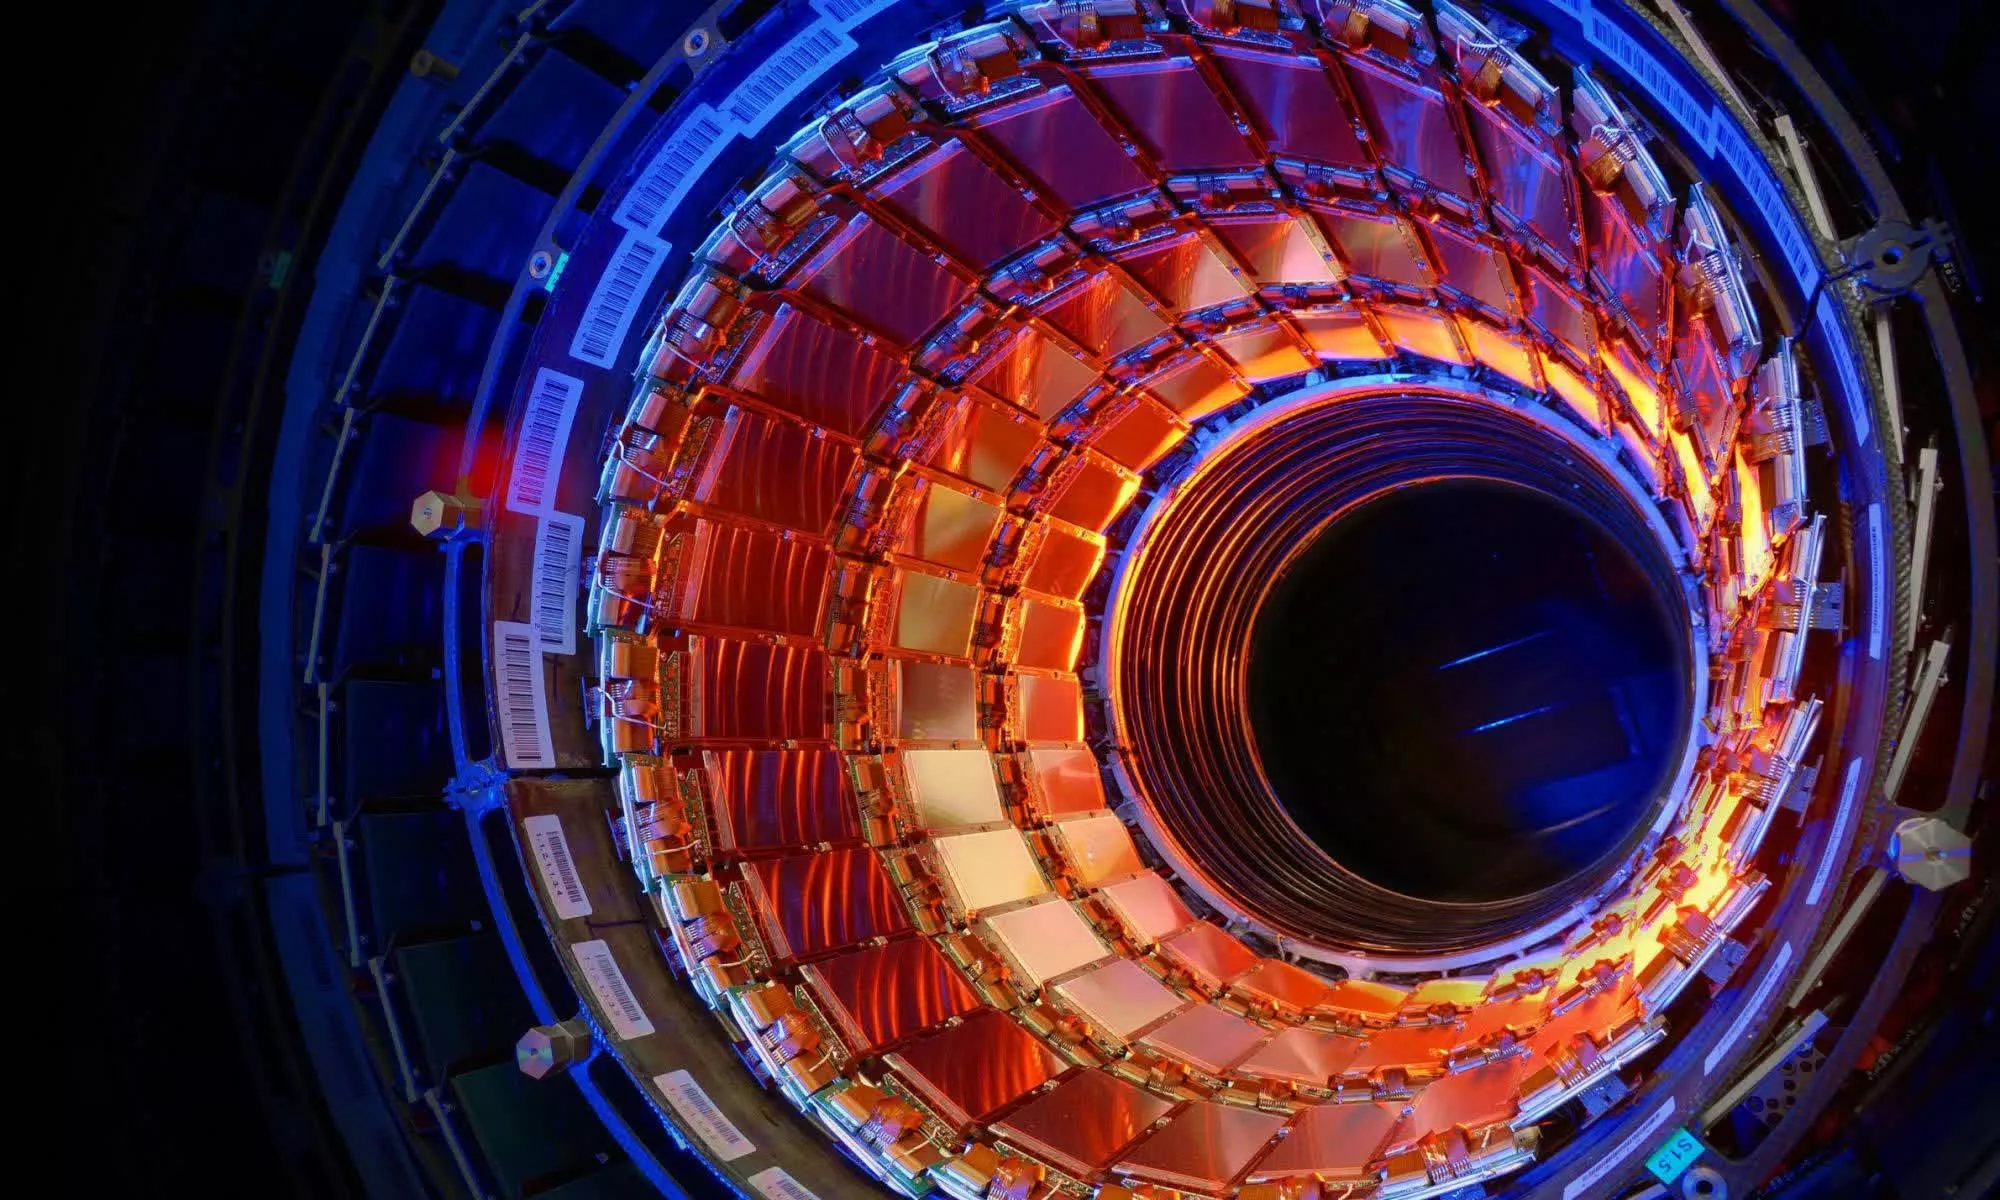 Large Hadron Collider's experiments detect the first evidence of Higgs boson decay